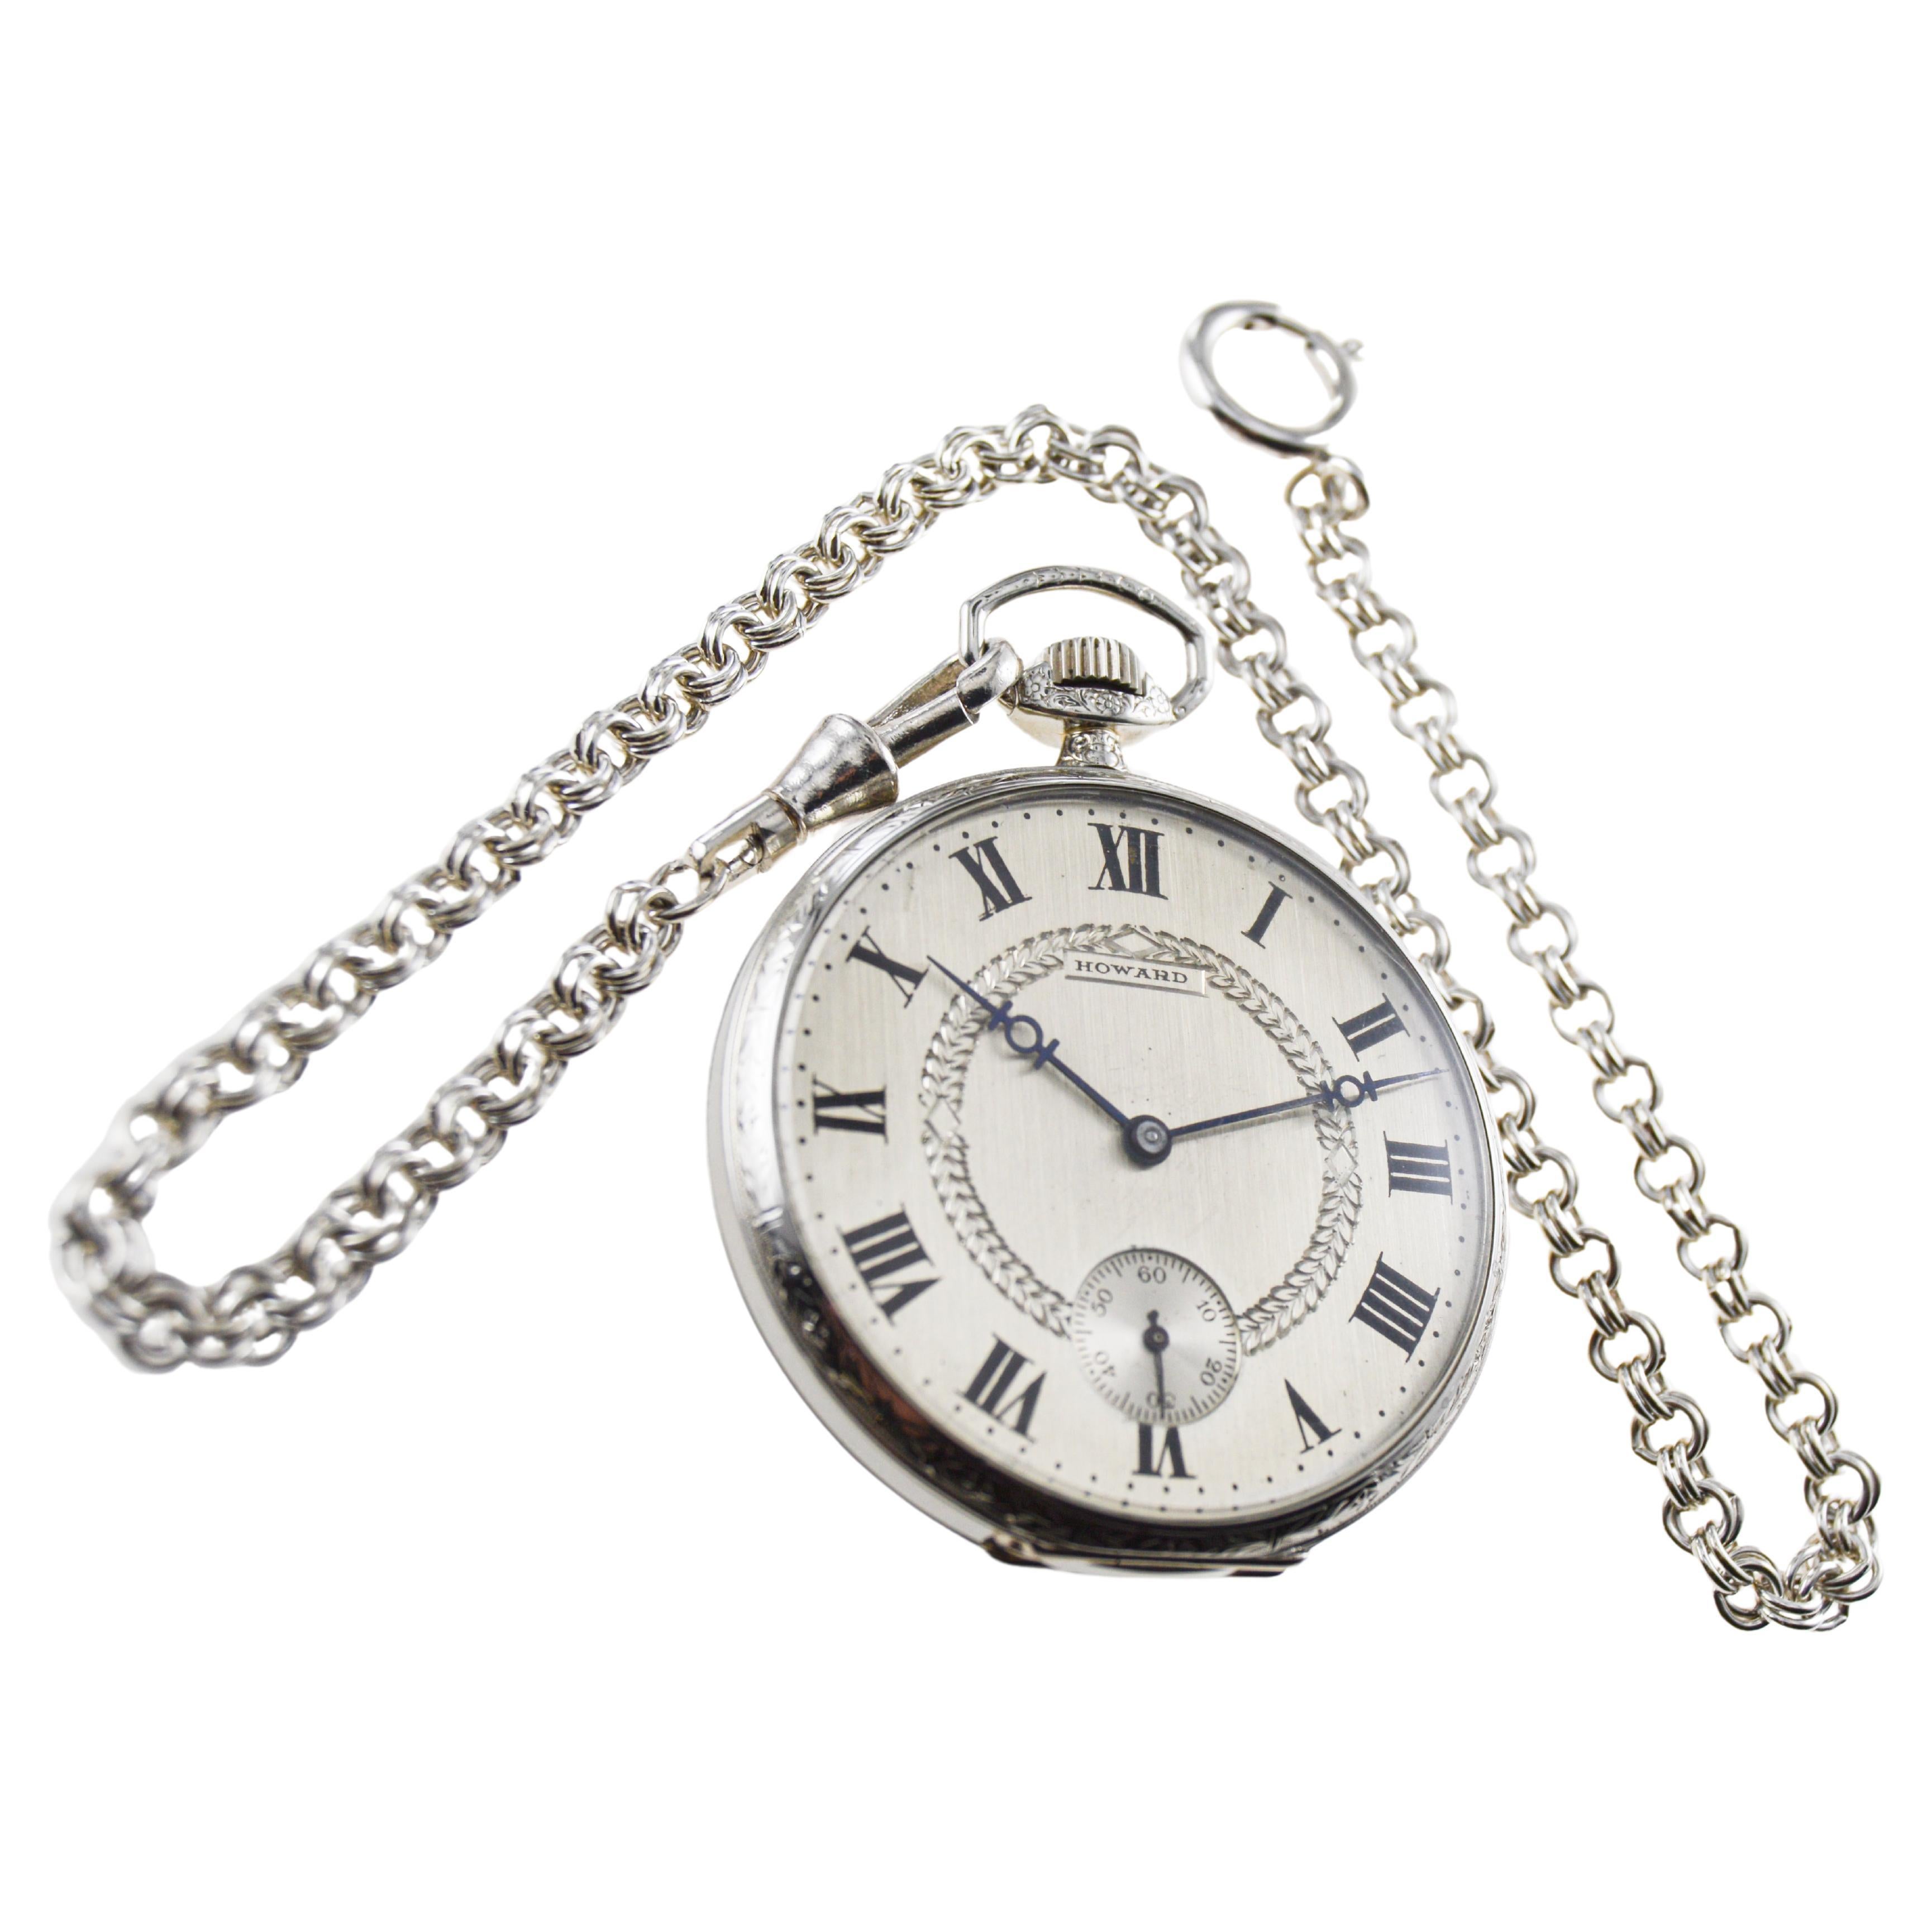 FACTORY / HOUSE: Howard Watch Company
STYLE / REFERENCE: Open Faced / 12 X 14 Size
METAL / MATERIAL: 18Kt. White Heavy Gold Filled
CIRCA / YEAR: 1917
DIMENSIONS / SIZE: Diameter 44mm
MOVEMENT / CALIBER: Manual Winding / 17 Jewels 
DIAL / HANDS: